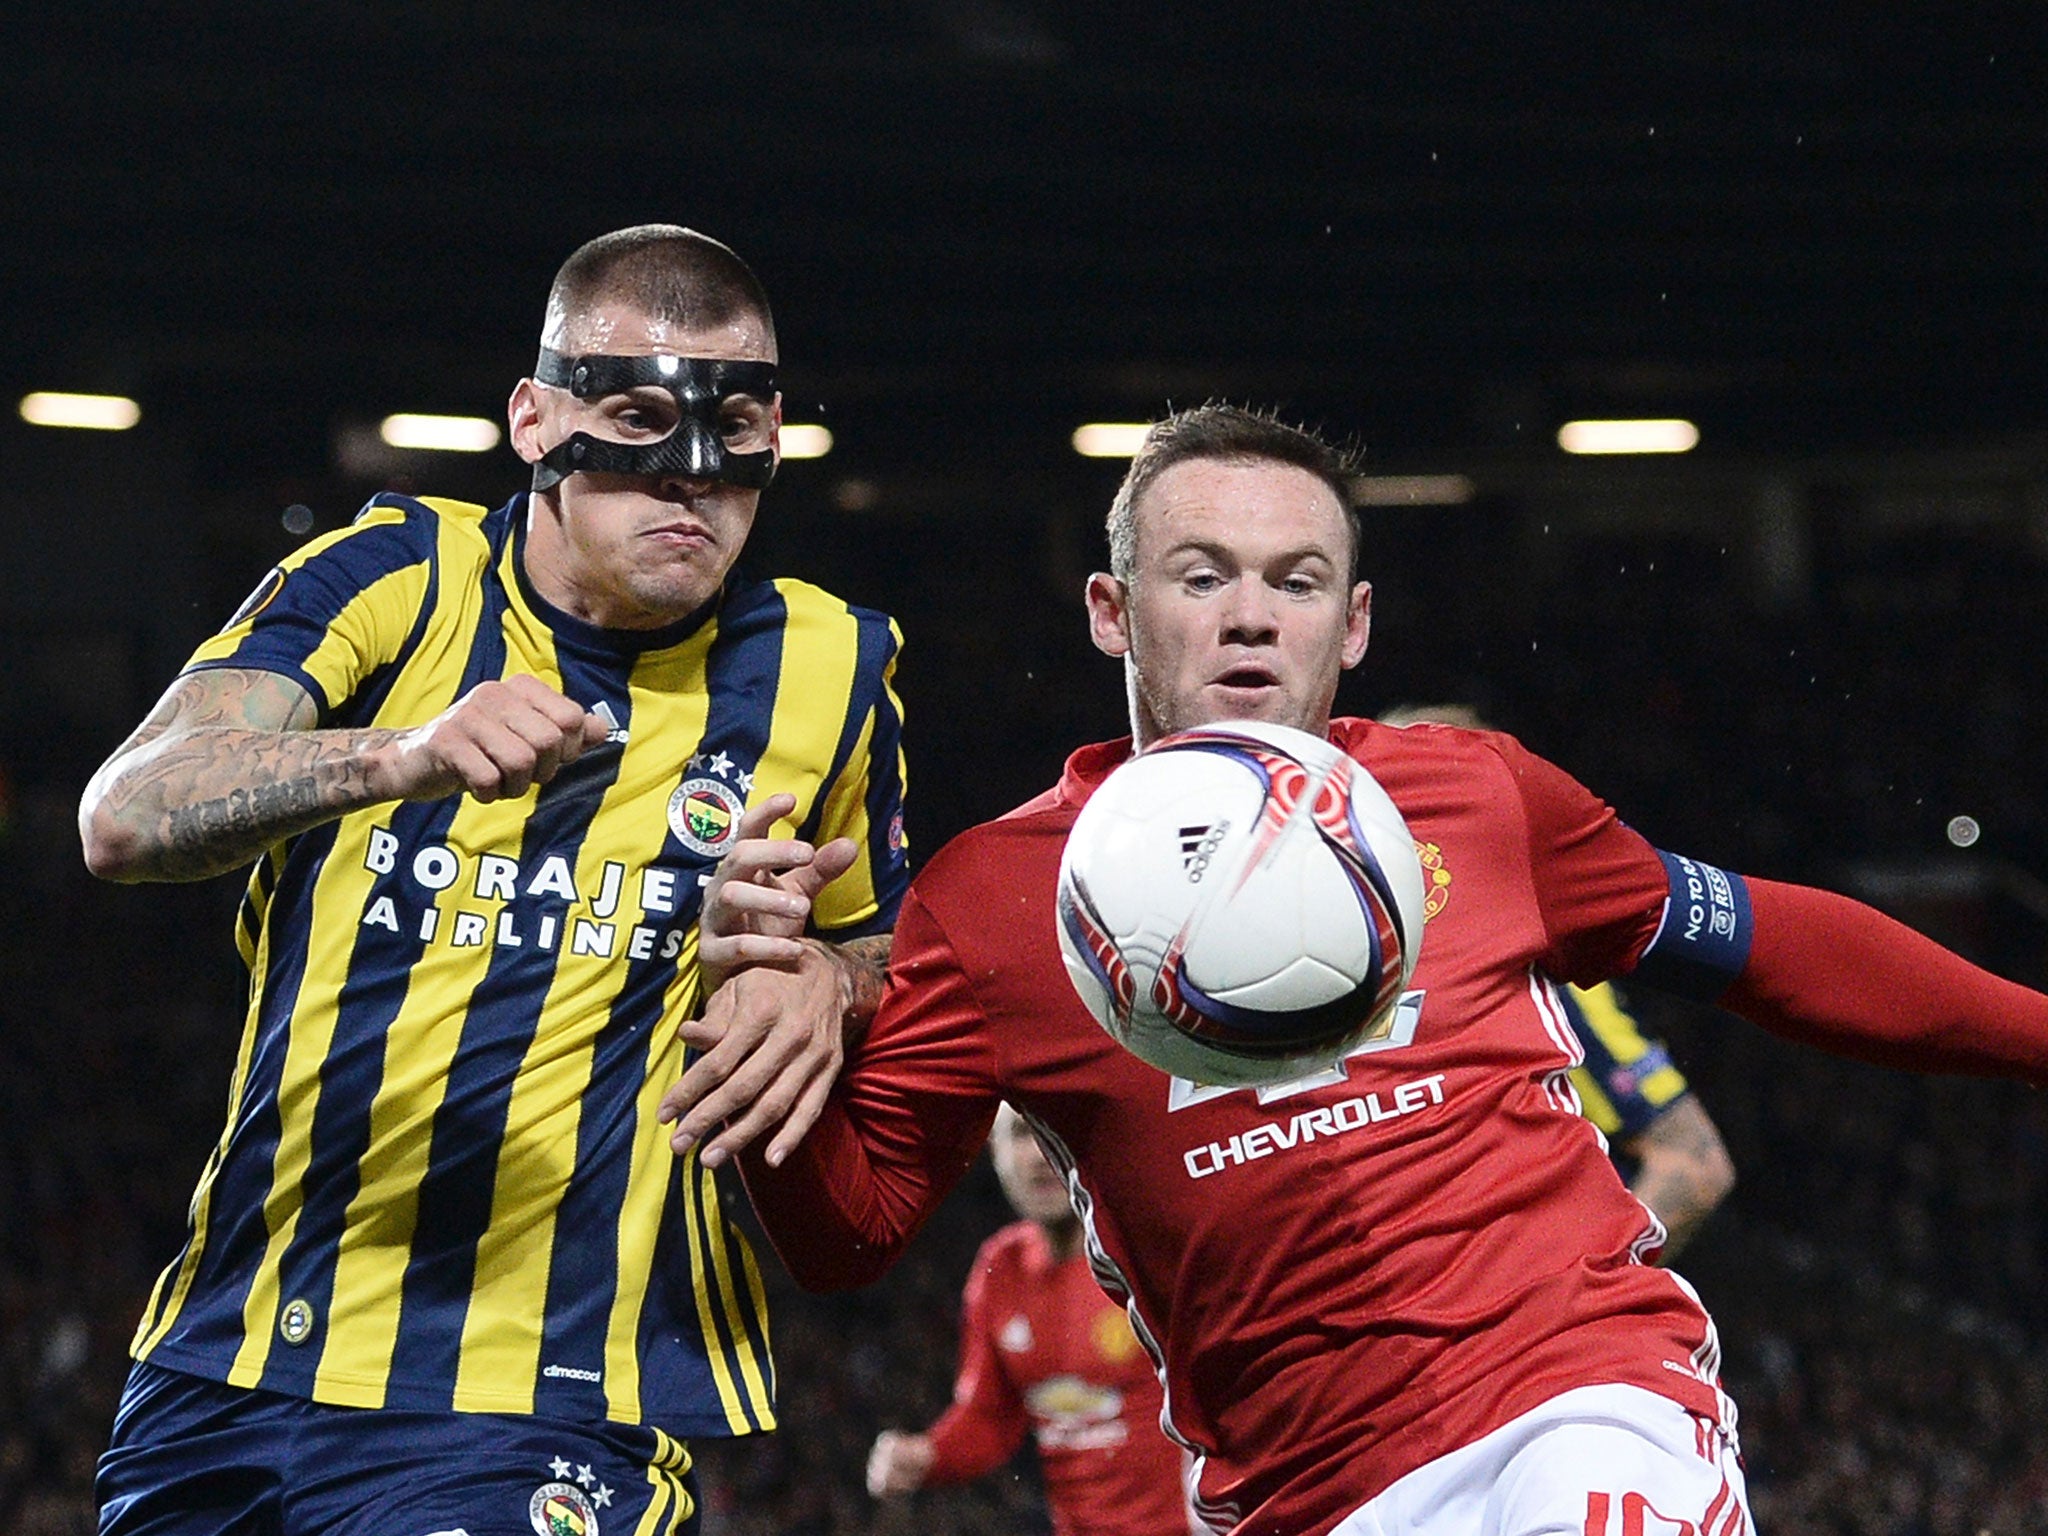 Skrtel and Rooney battle for the ball at Old Trafford